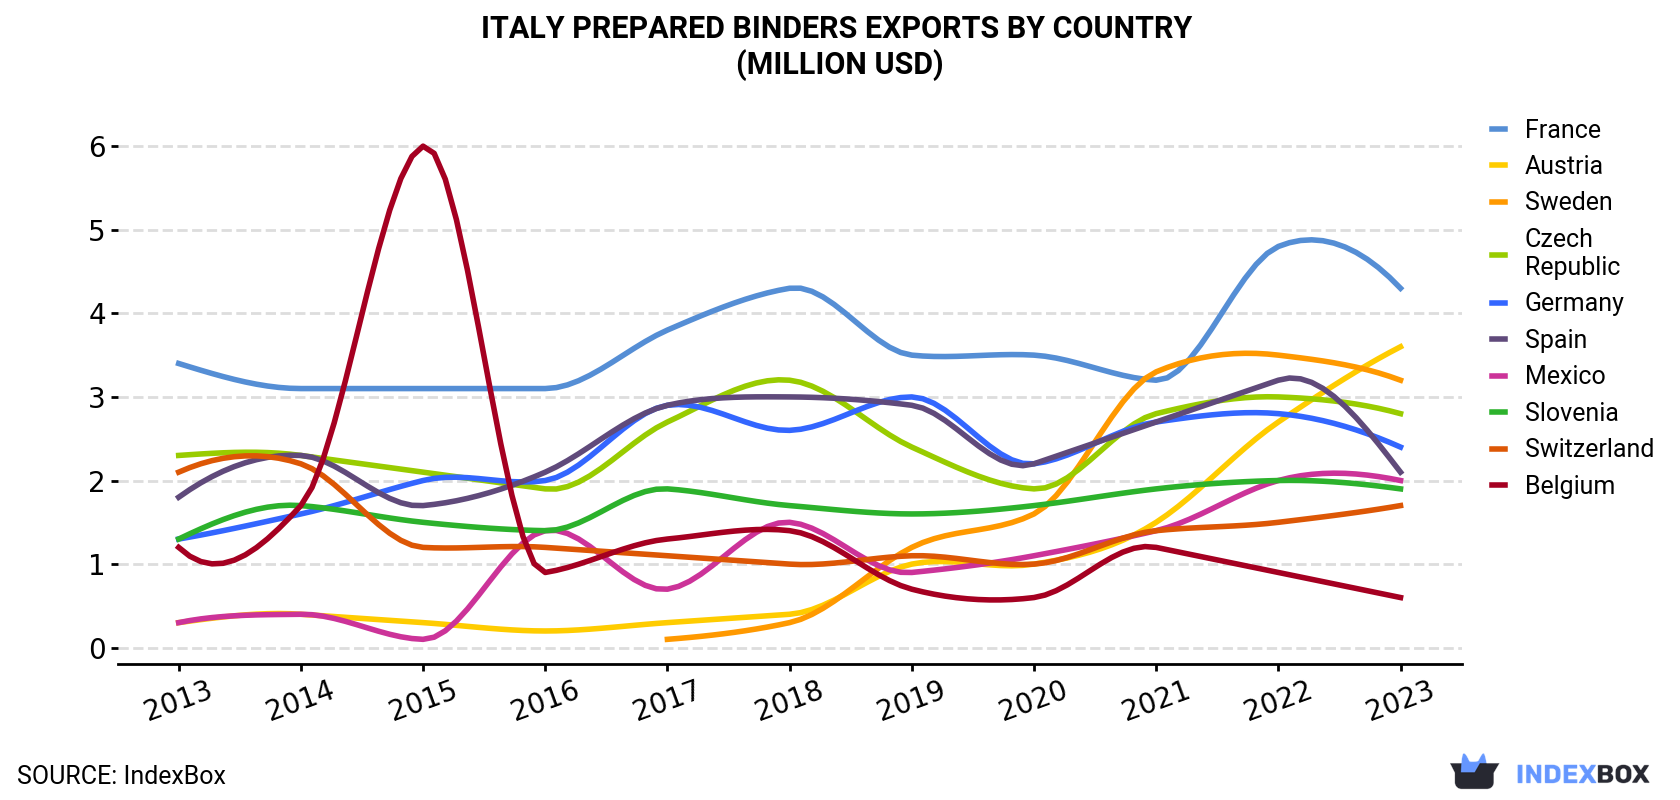 Italy Prepared Binders Exports By Country (Million USD)